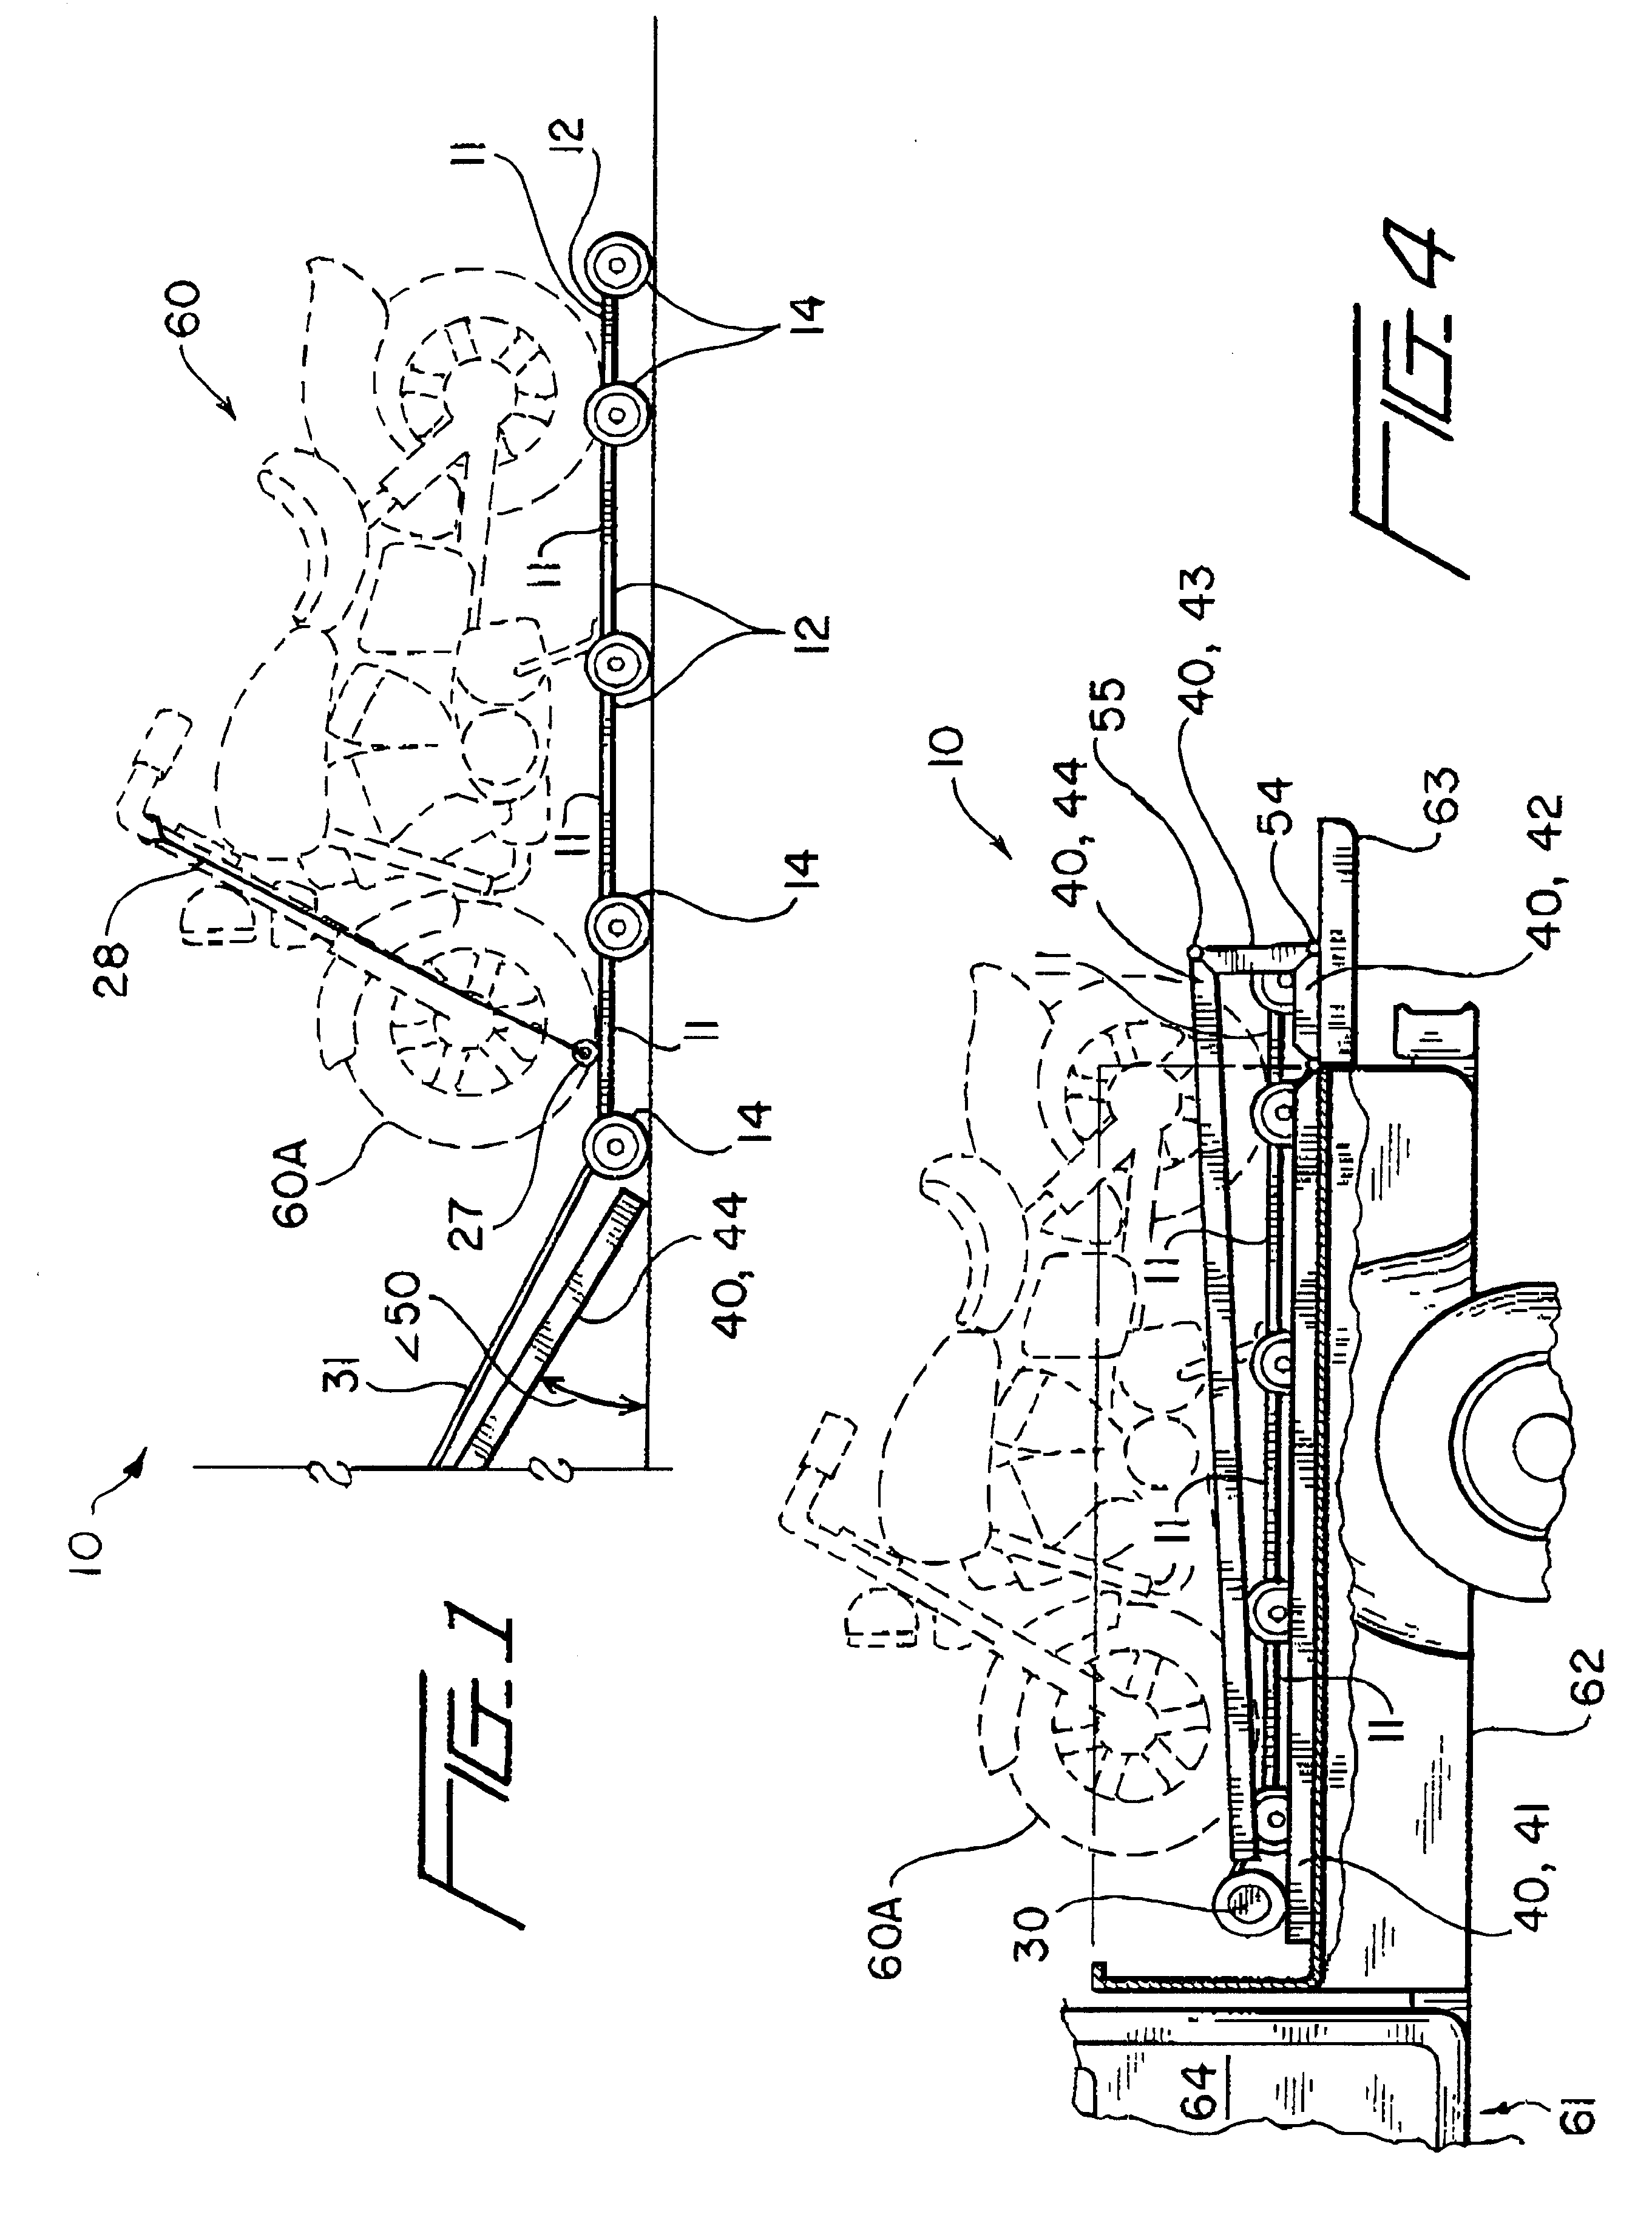 Apparatus for loading and unloading a vehicle bed